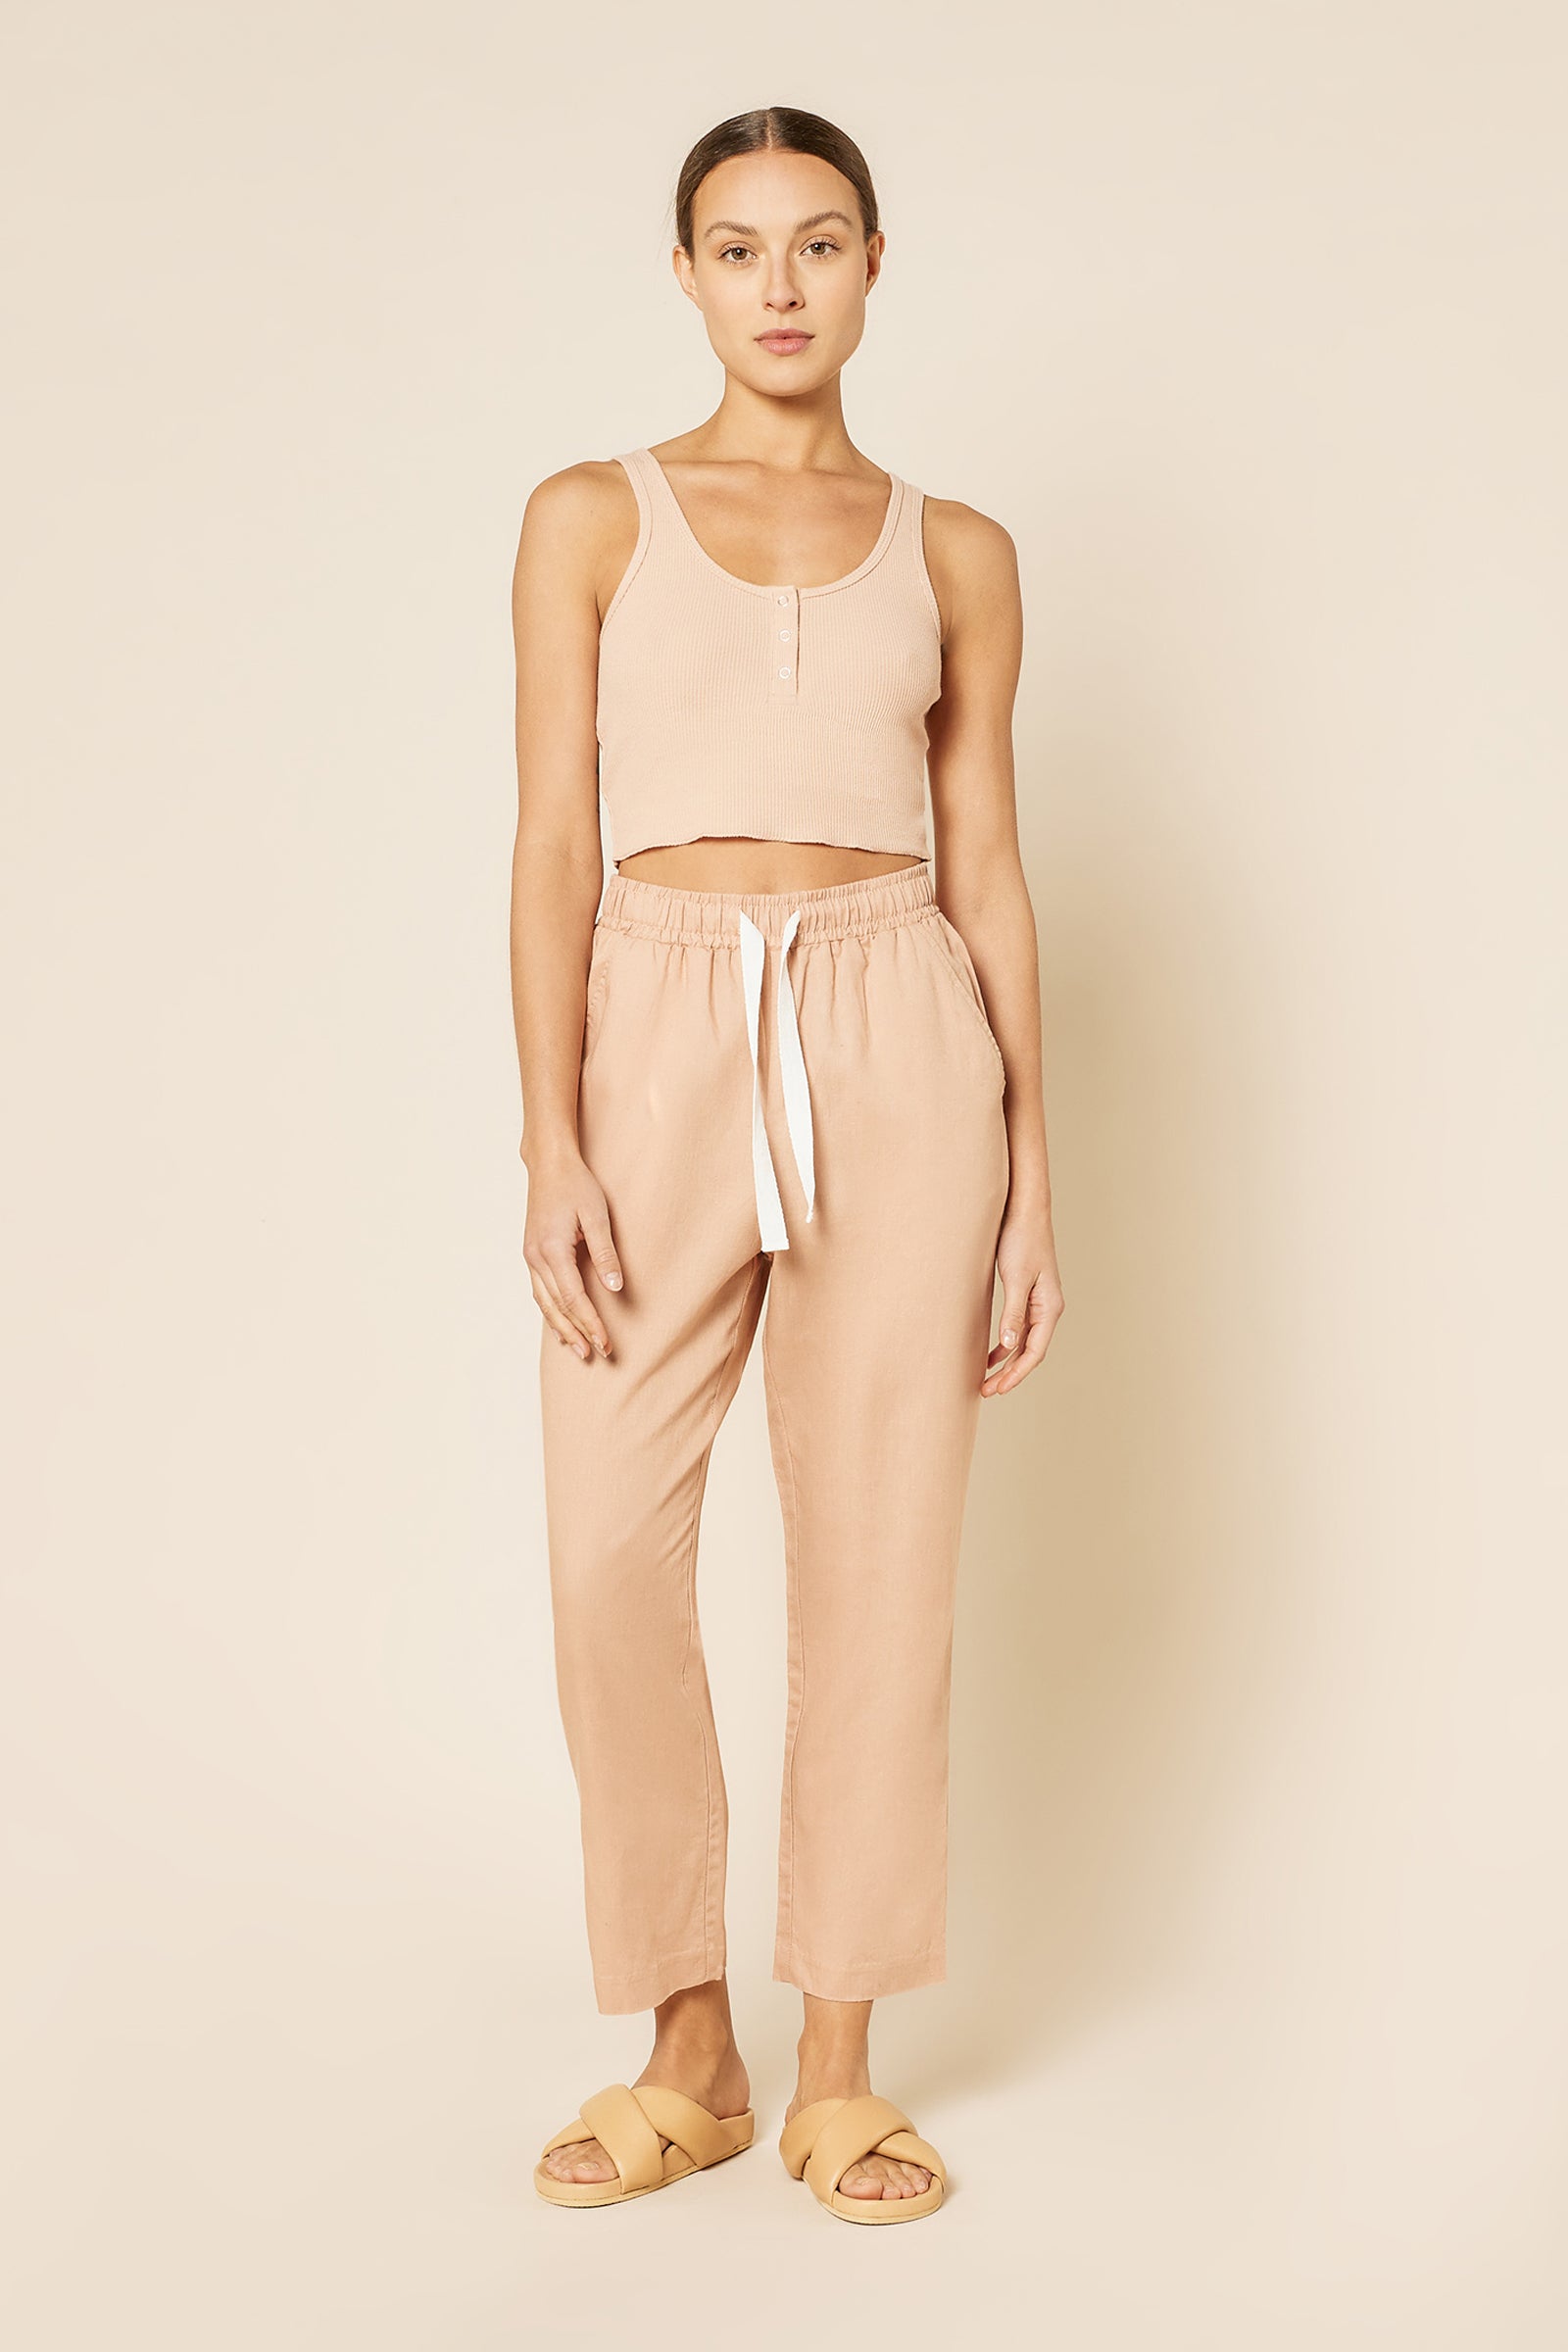 Nude Lucy Nude Classic Pant In a Orange Clay Colour